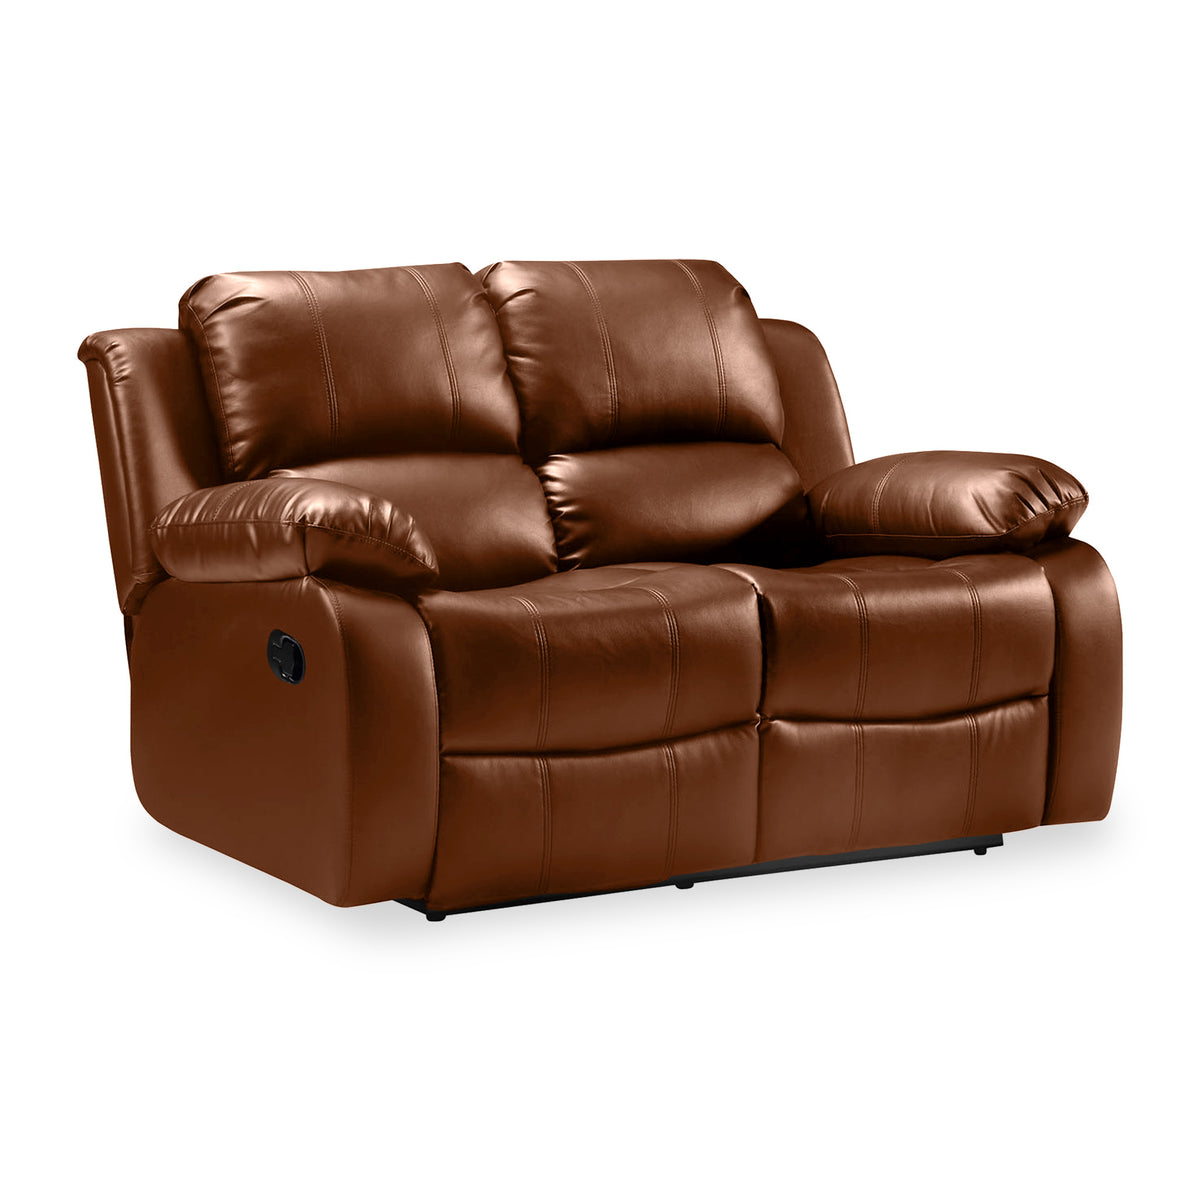 Valencia Tan 2 Seater Reclining Leather Sofa from Roseland Furniture